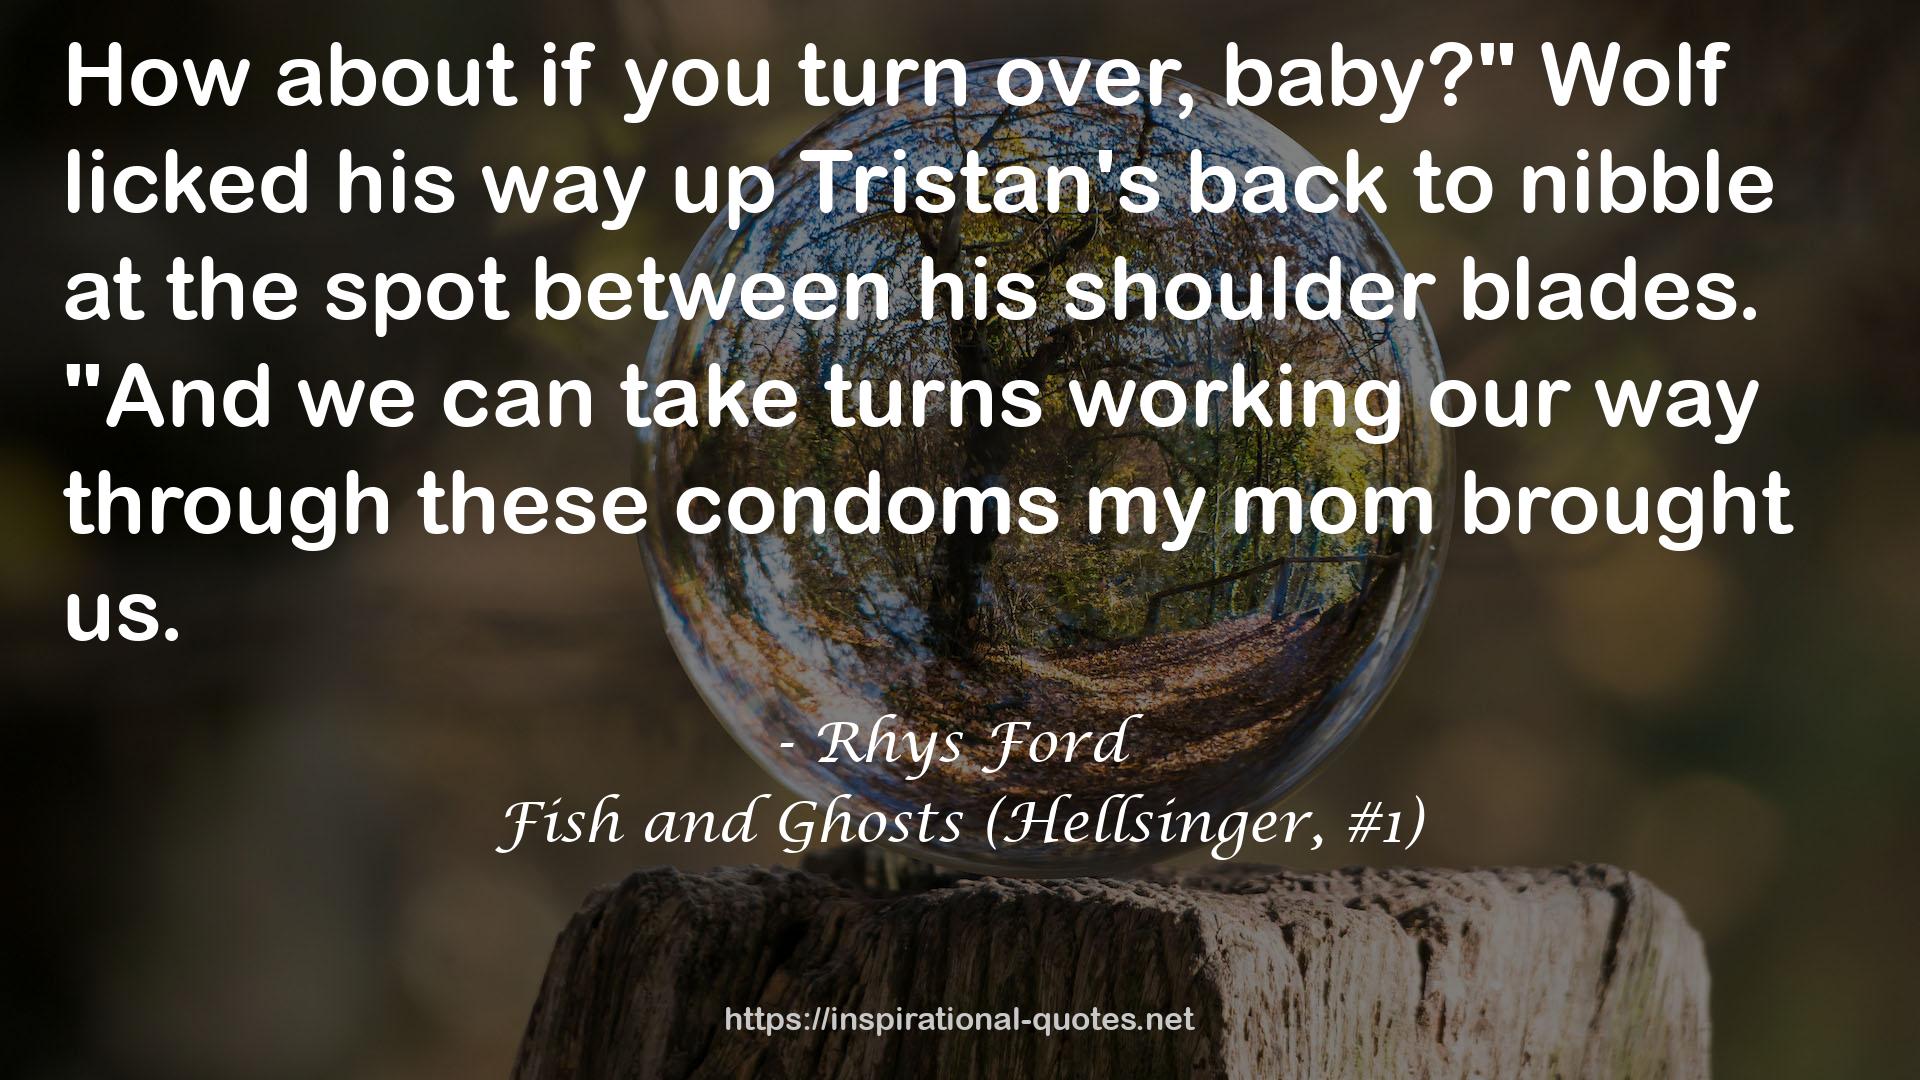 Fish and Ghosts (Hellsinger, #1) QUOTES